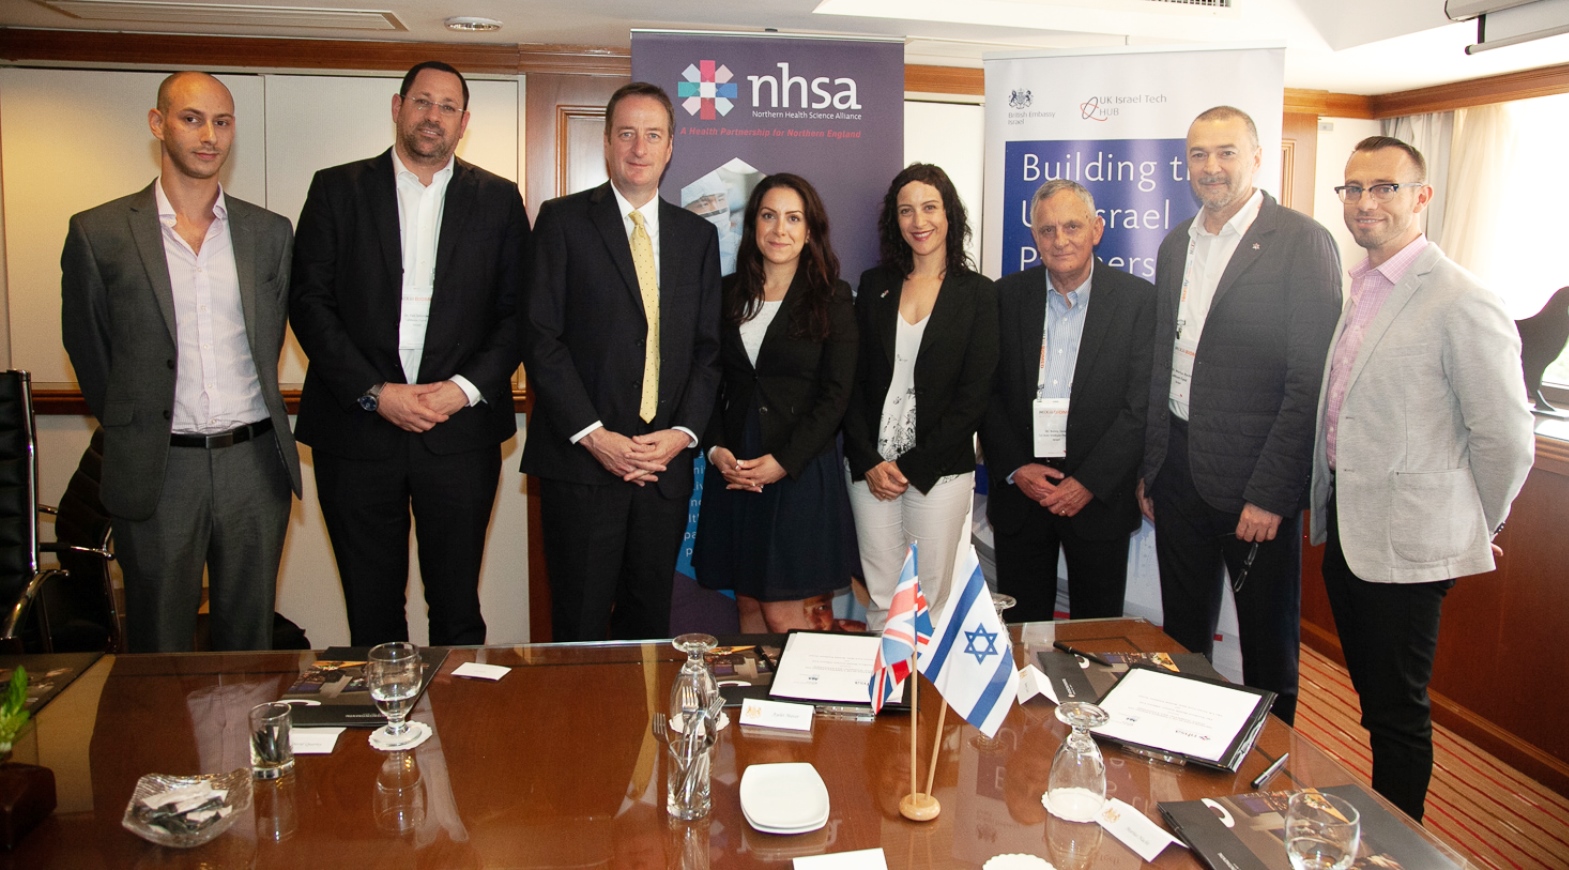 British and Israeli officials at the signing of an MoU between the Northern Health Science Alliance of England and the UK Israel Tech Hub, May 16, 2018. Photo by Alexander Elman